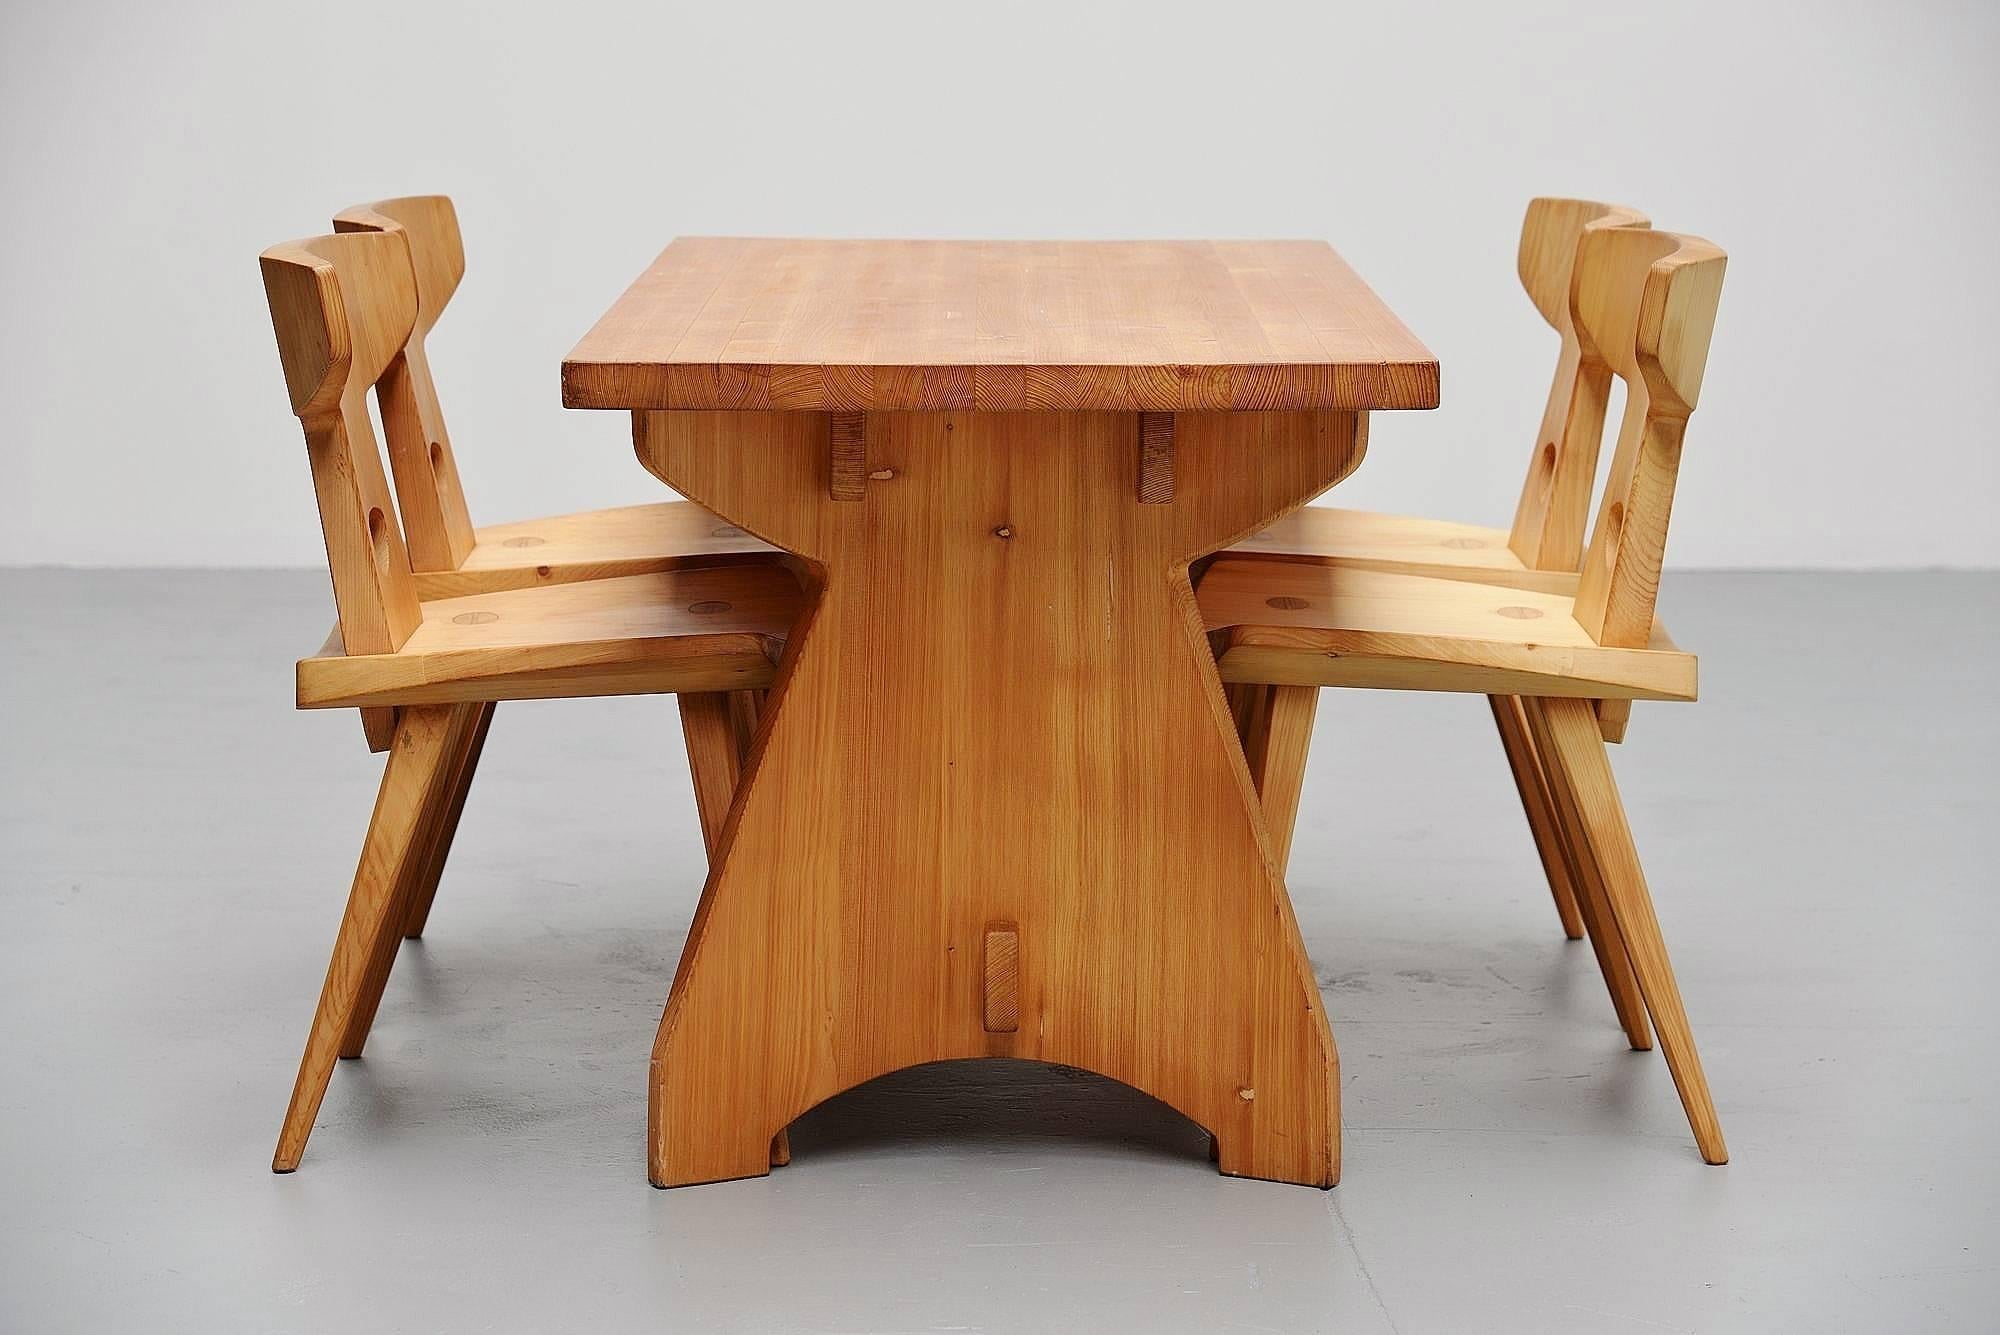 Fantastic set of four chairs and table designed by Jacob Kielland-Brandt, manufactured by I. Christiansen, Denmark, 1960. The designer won the Cabinetmaker Guild price in Denmark, 1960. Super handcrafted chairs and table in solid pine wood. Amazing